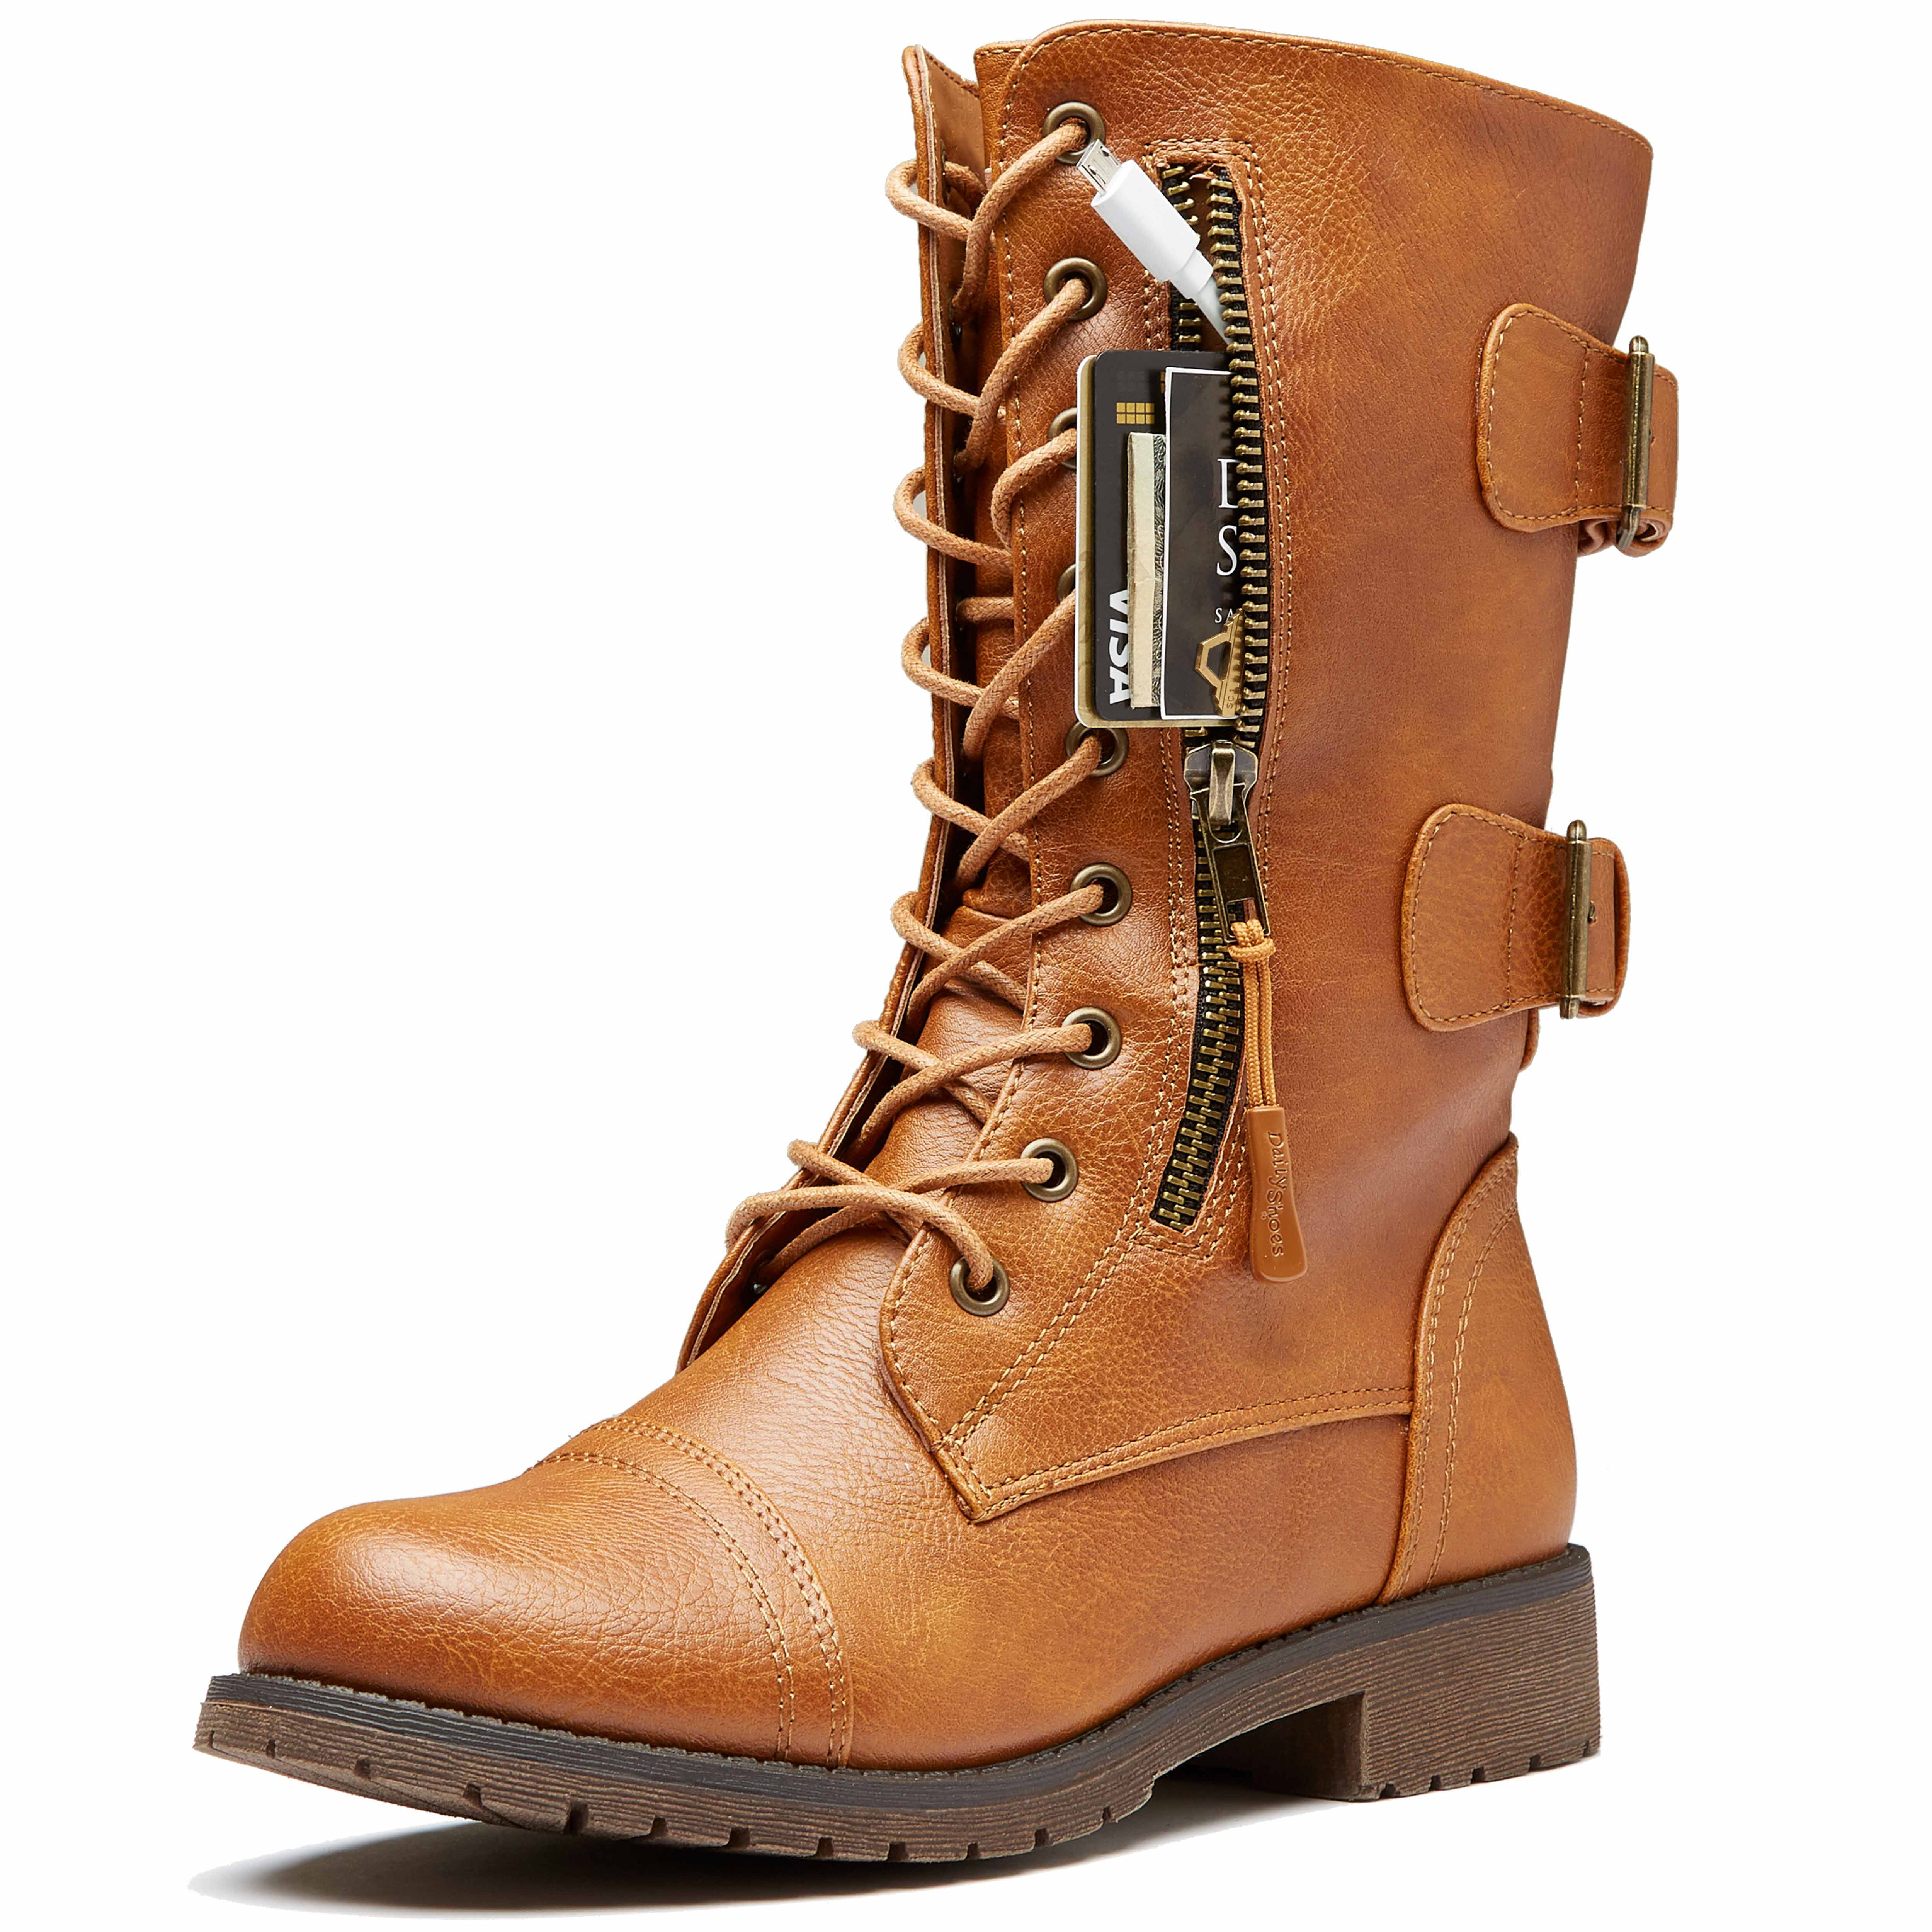 Details about   L0081 Military Style Combat Lace Up Boot with Buckles and Zippers Women's 5-10 